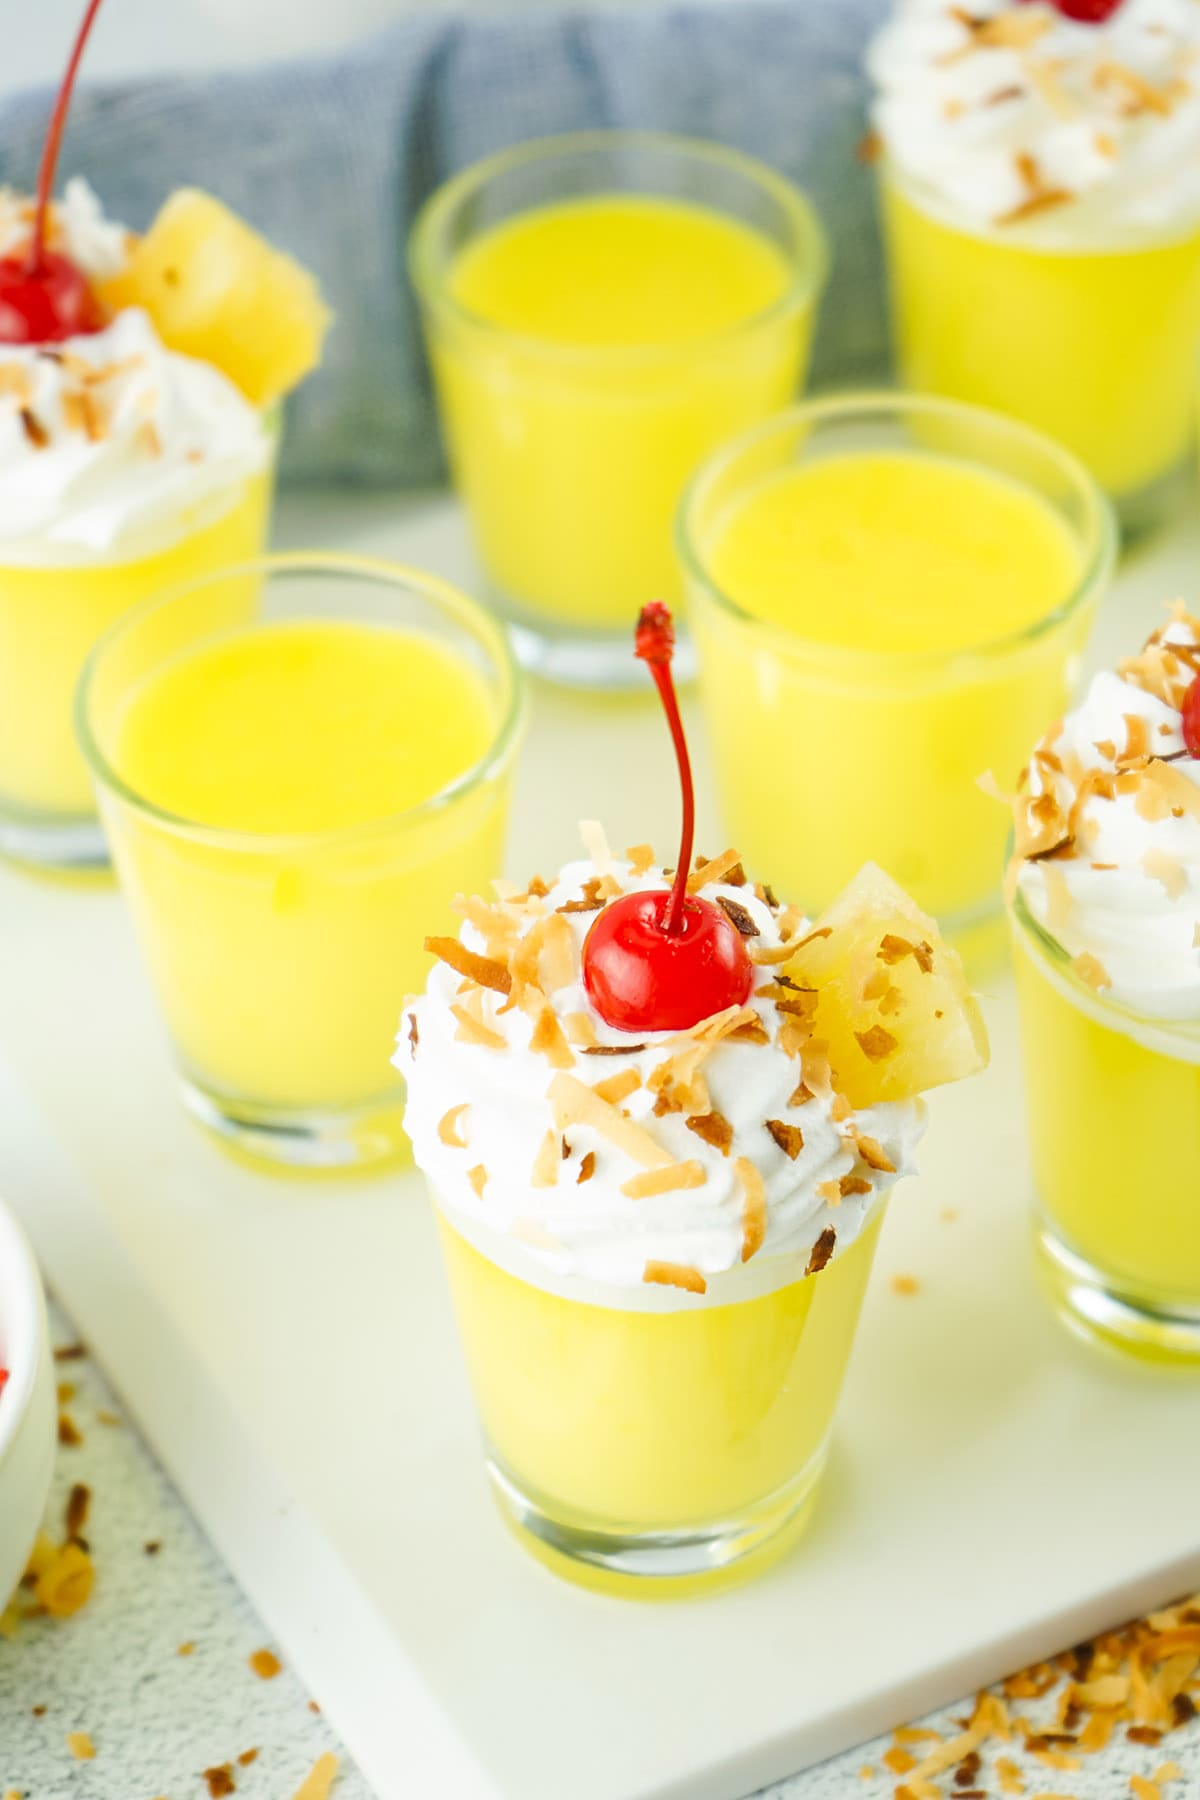 pina colada pudding shot with pineapple topping